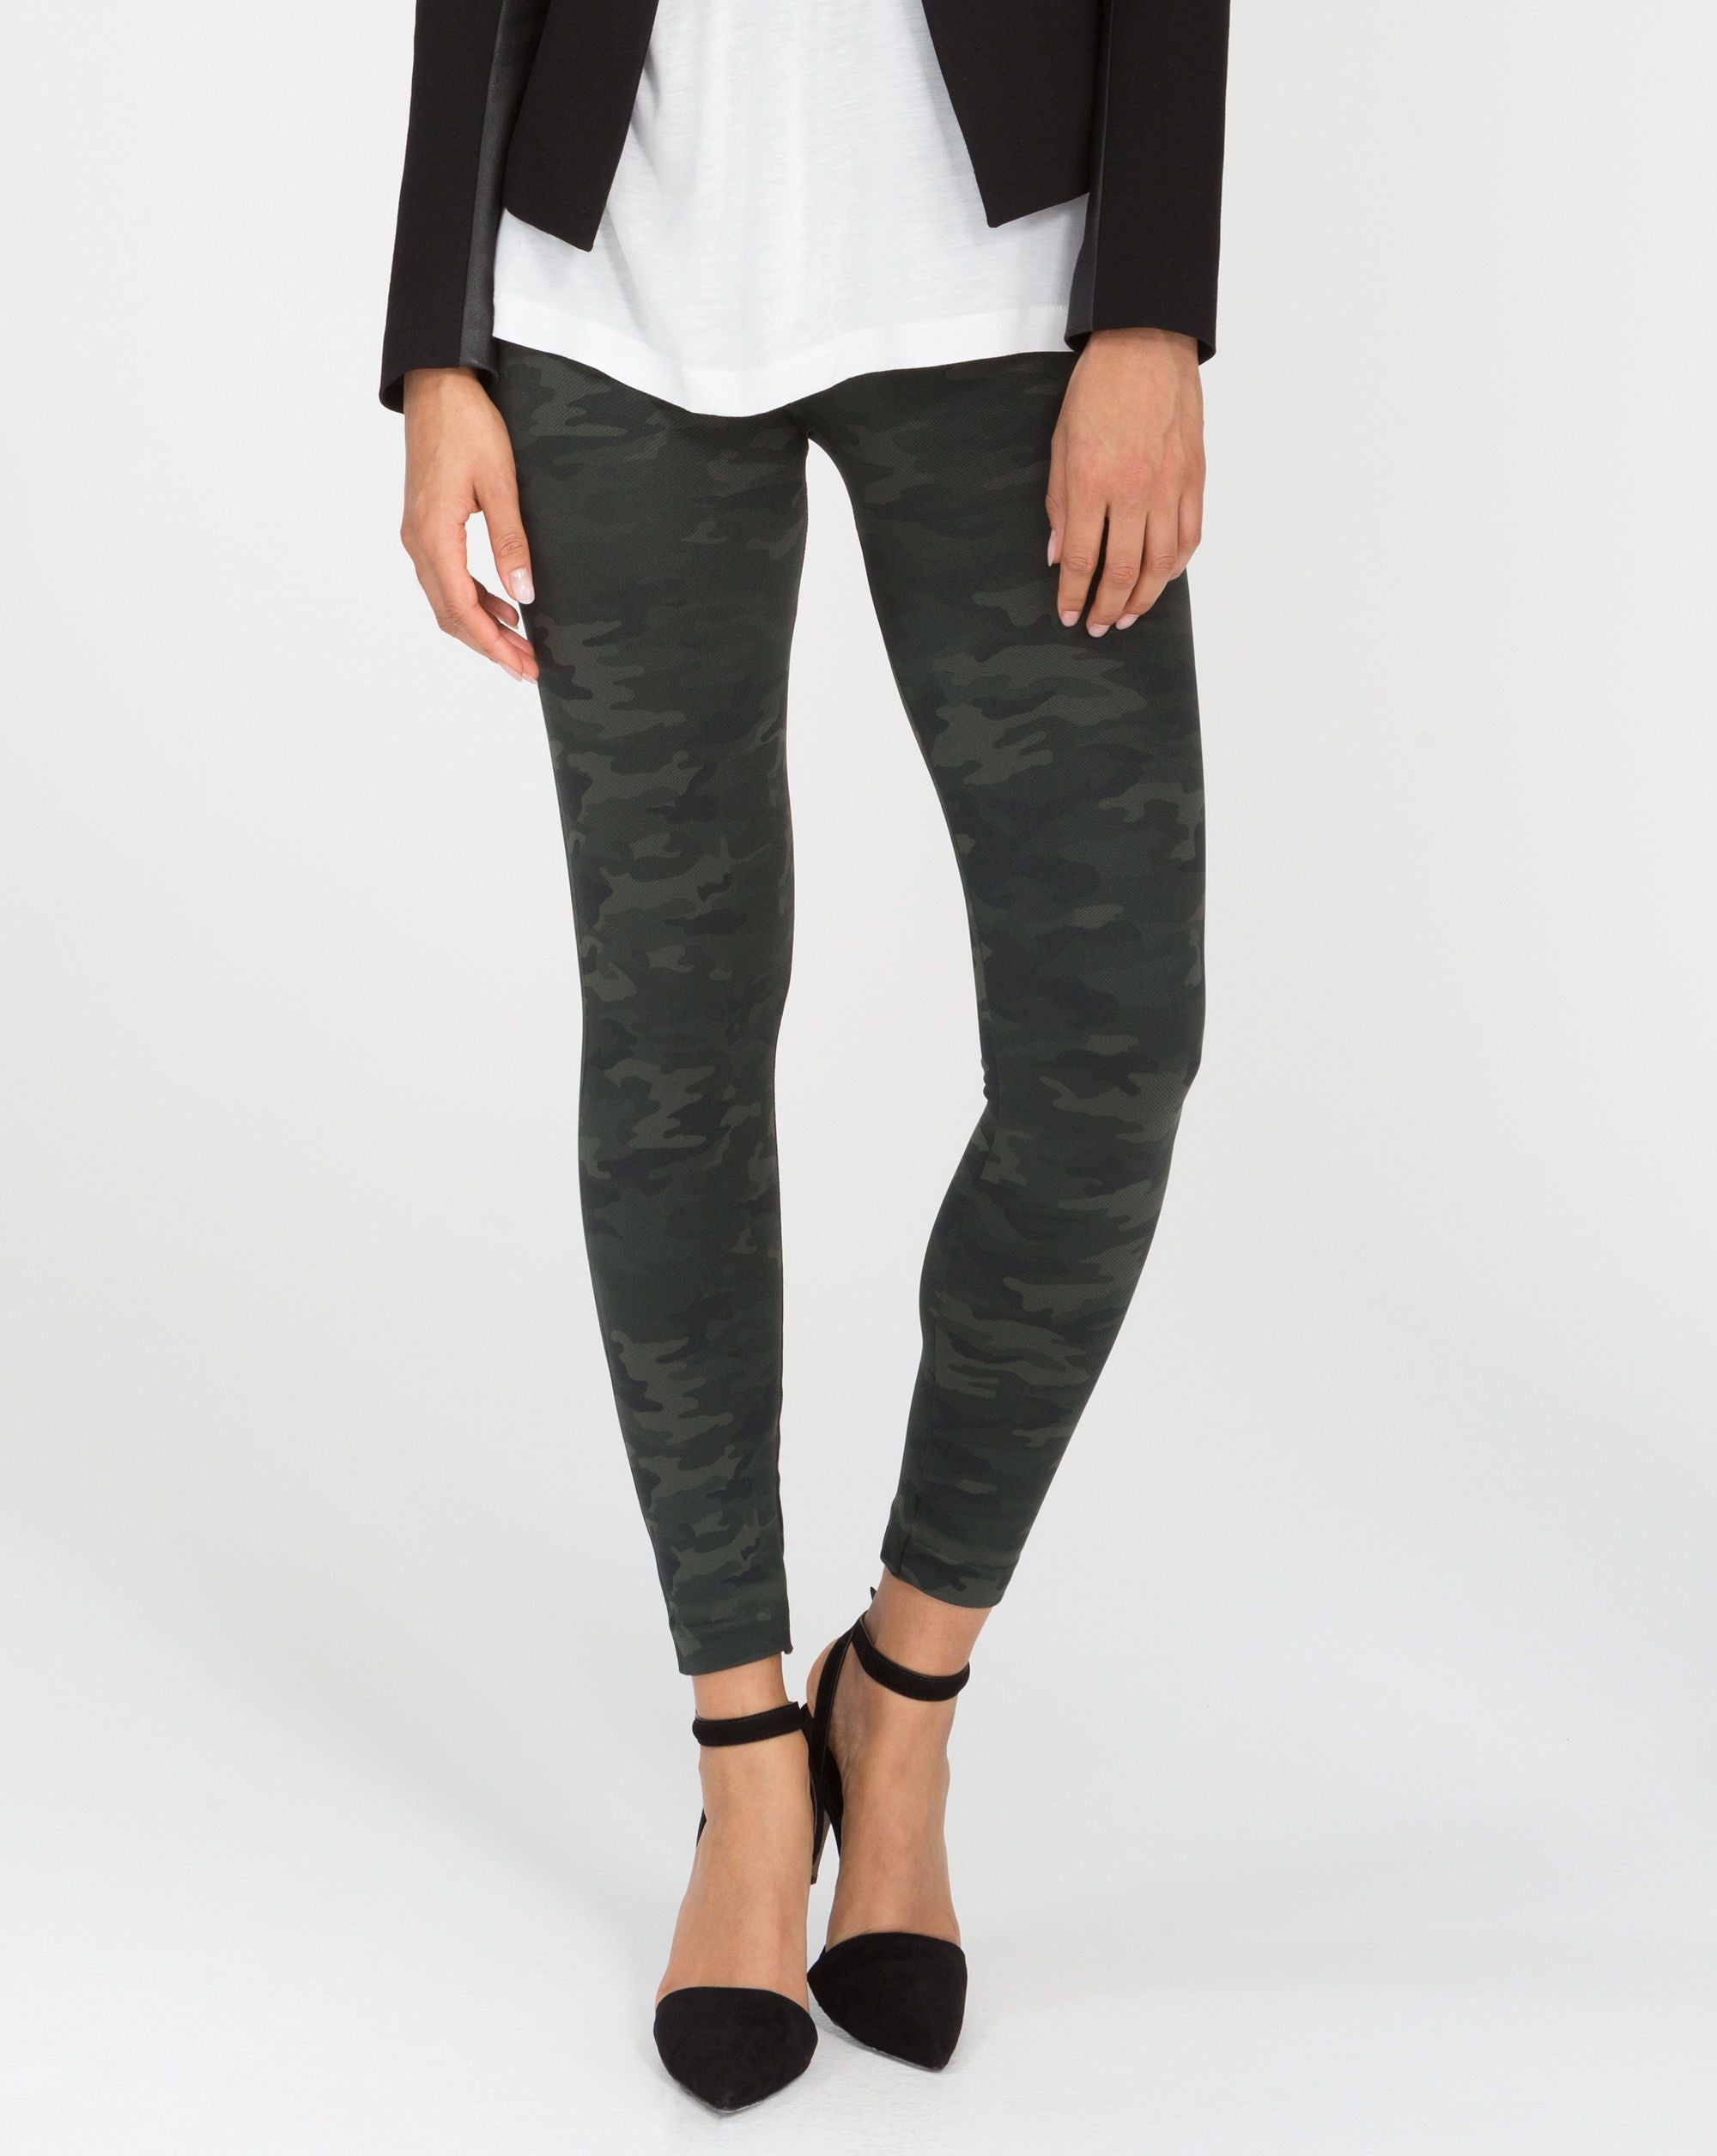 SPANX - Look at Me Now Leggings, Faux Leather Leggings, or